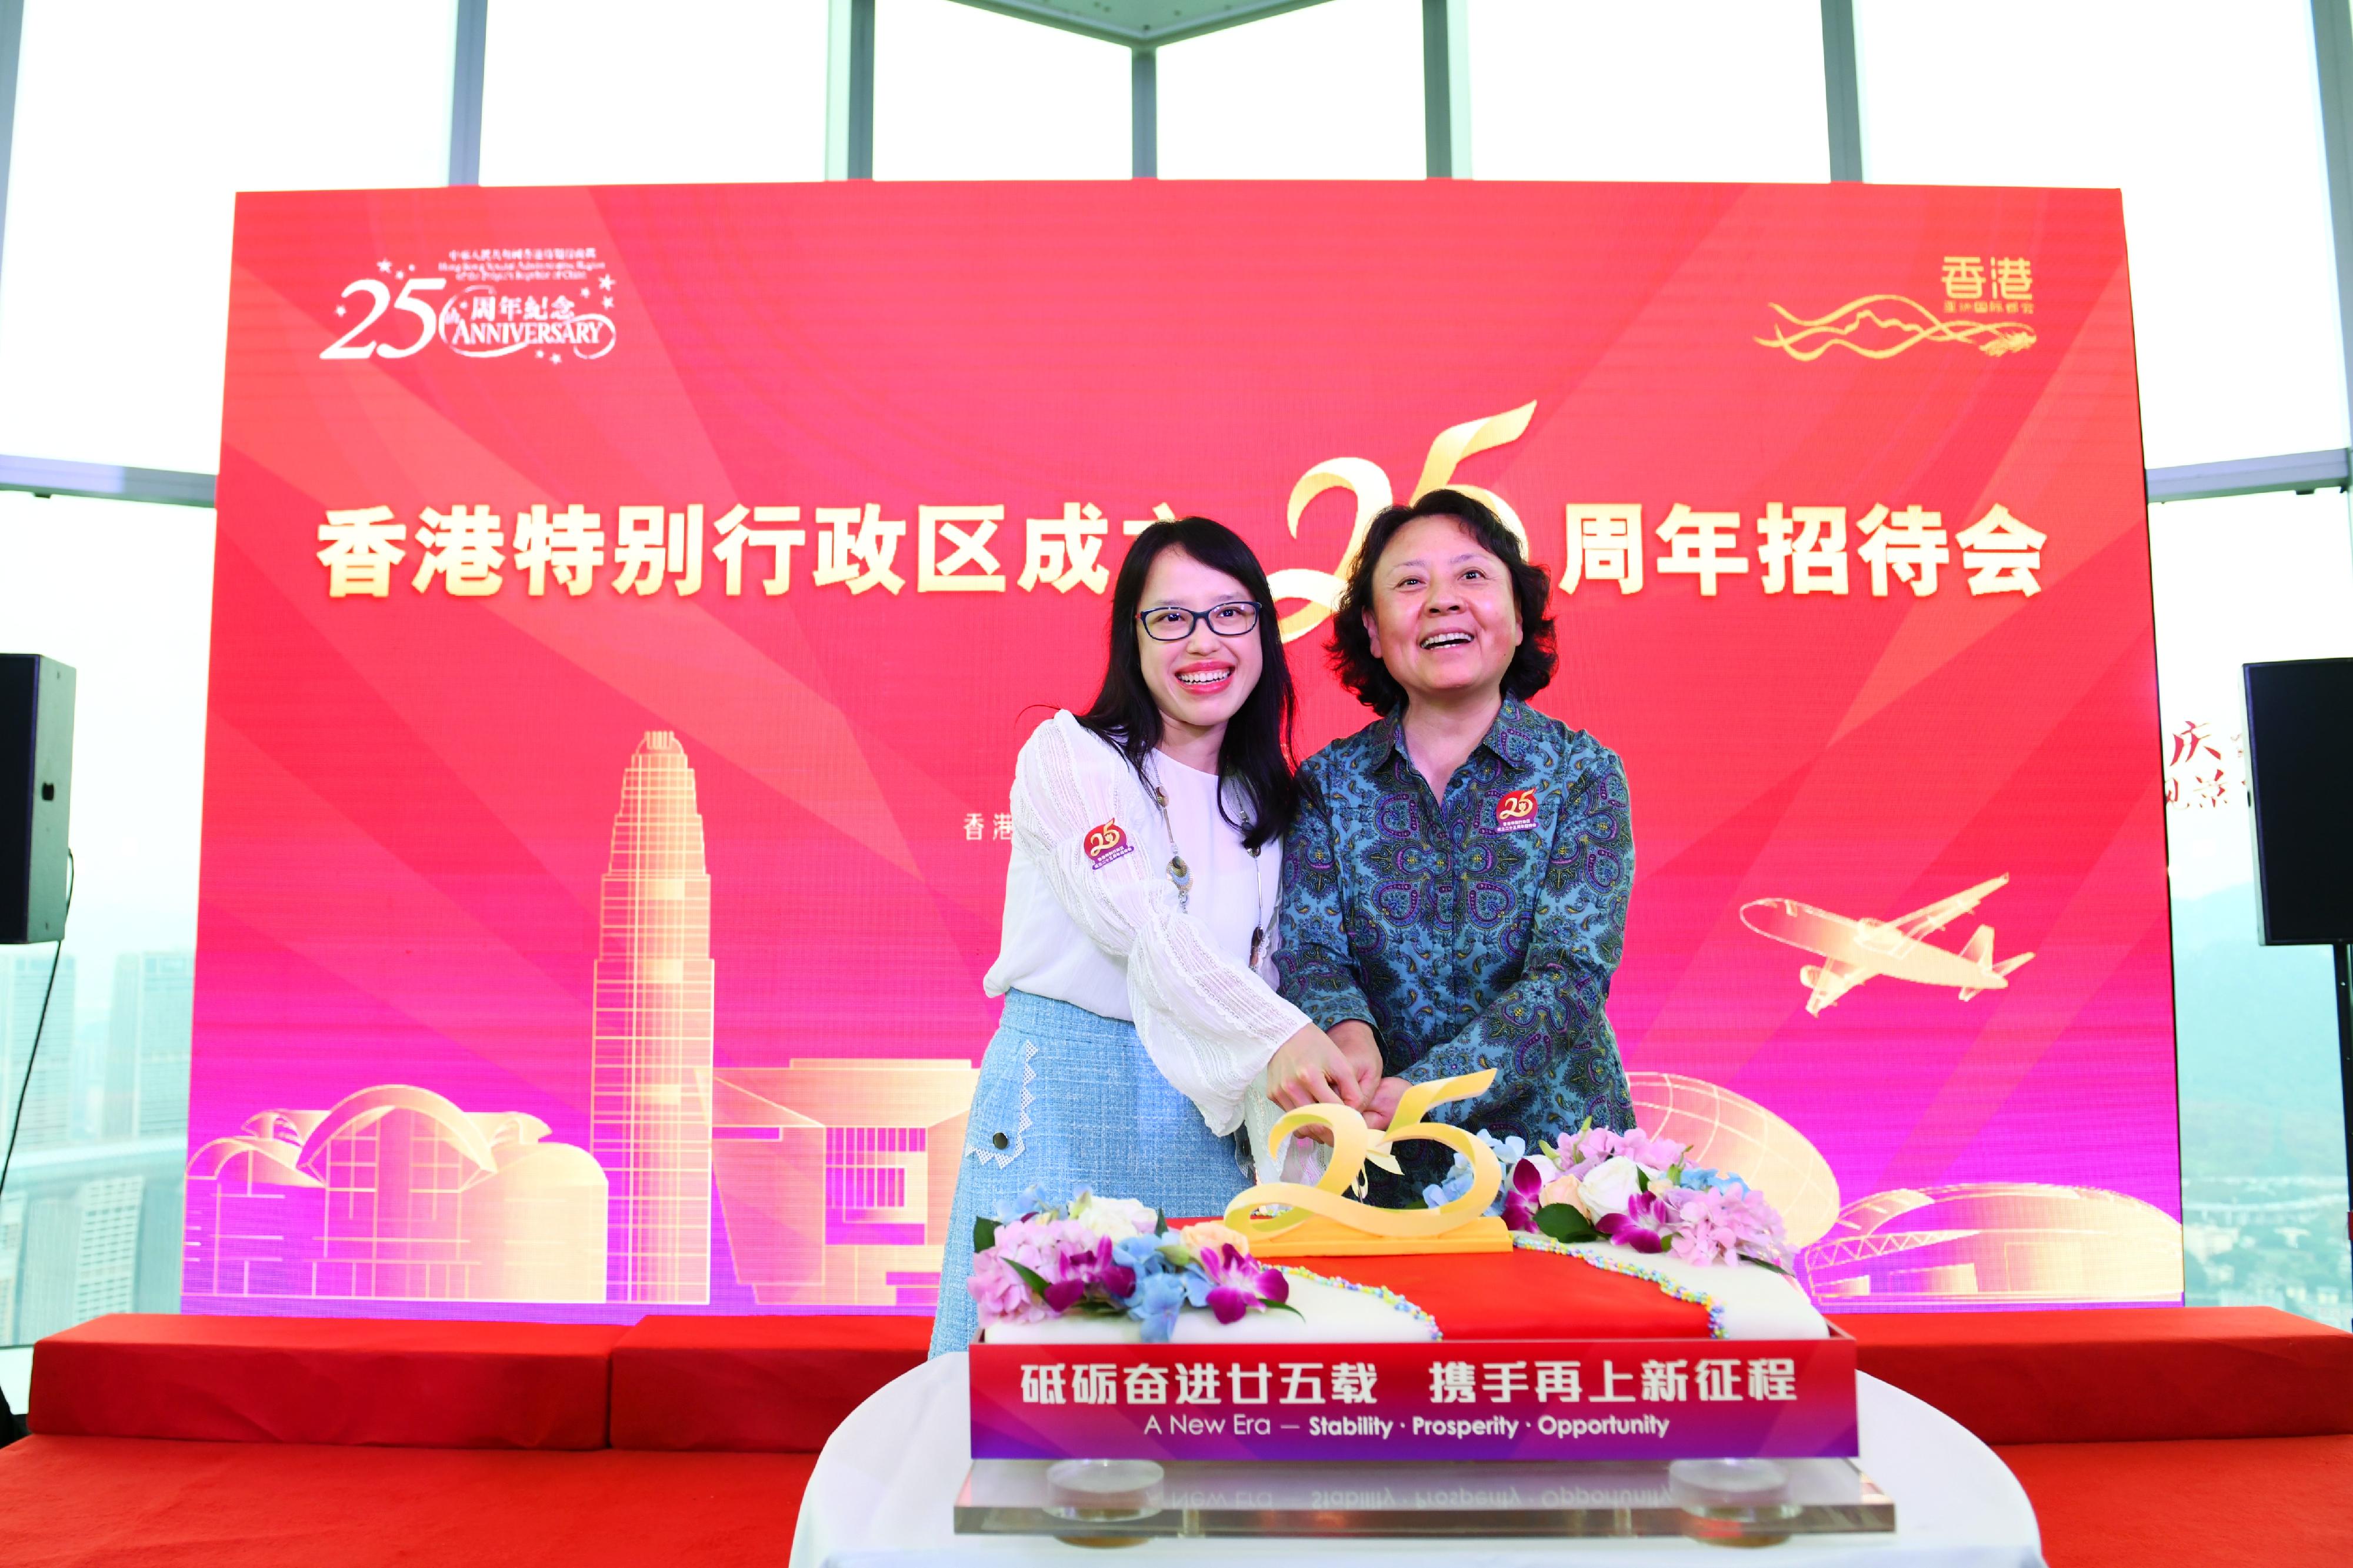 The Hong Kong Economic and Trade Office in Chengdu (CDETO) of the Government of the Hong Kong Special Administrative Region (HKSAR) has been holding a series of celebration activities since June to mark the 25th anniversary of the establishment of the HKSAR. Photo shows the Director of the CDETO, Miss Li Wan-in (left), and the Vice Chairman of the Chongqing Municipal Committee of the Chinese People's Political Consultative Conference, Ms Zhang Ling (right), cutting a cake at a reception in Chongqing on July 1.